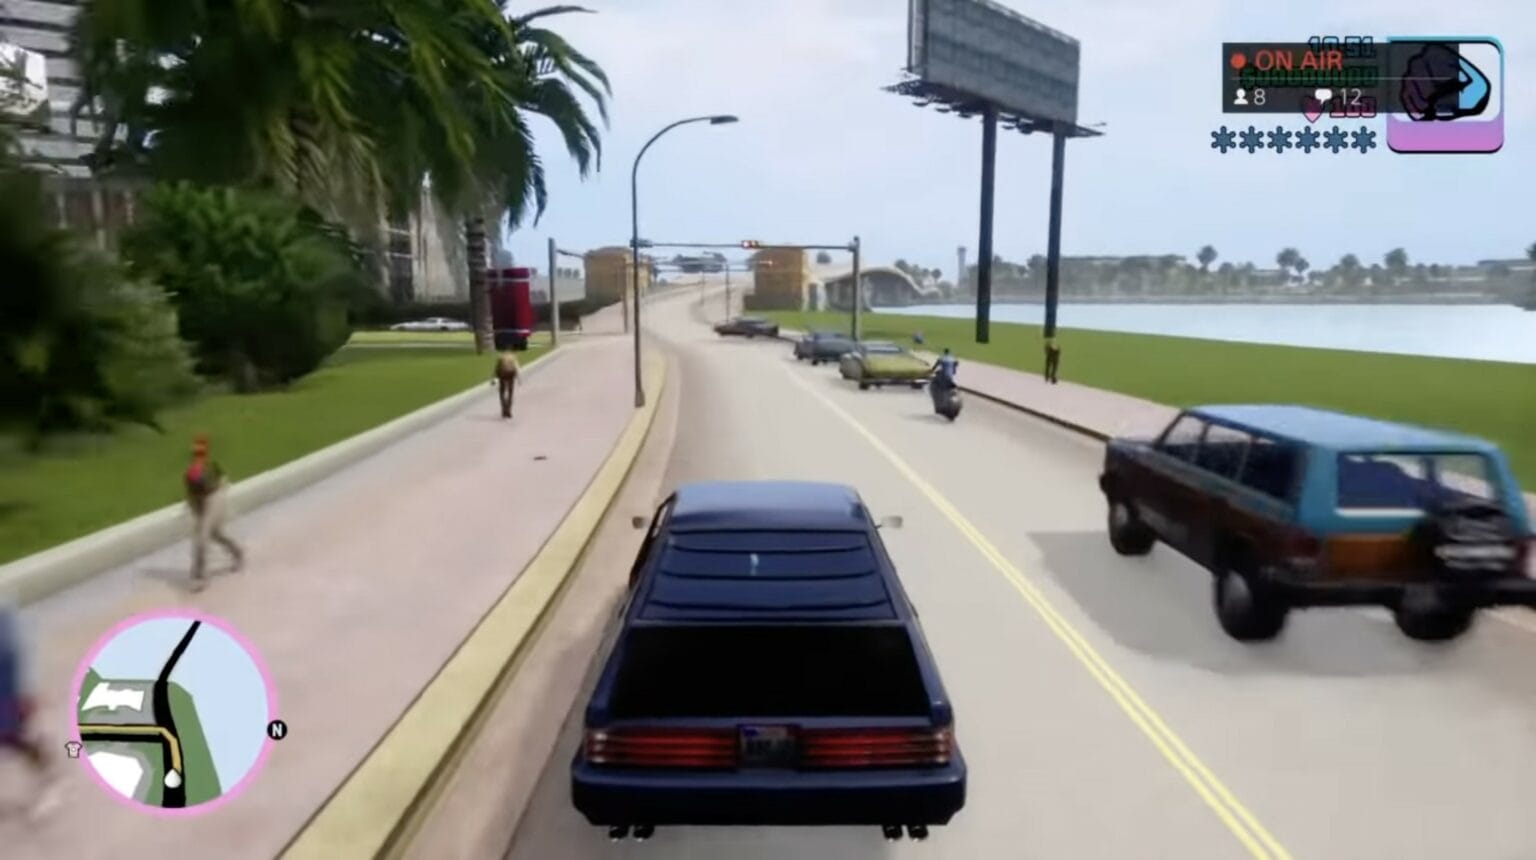 GTA The Trilogy leaked gameplay footage